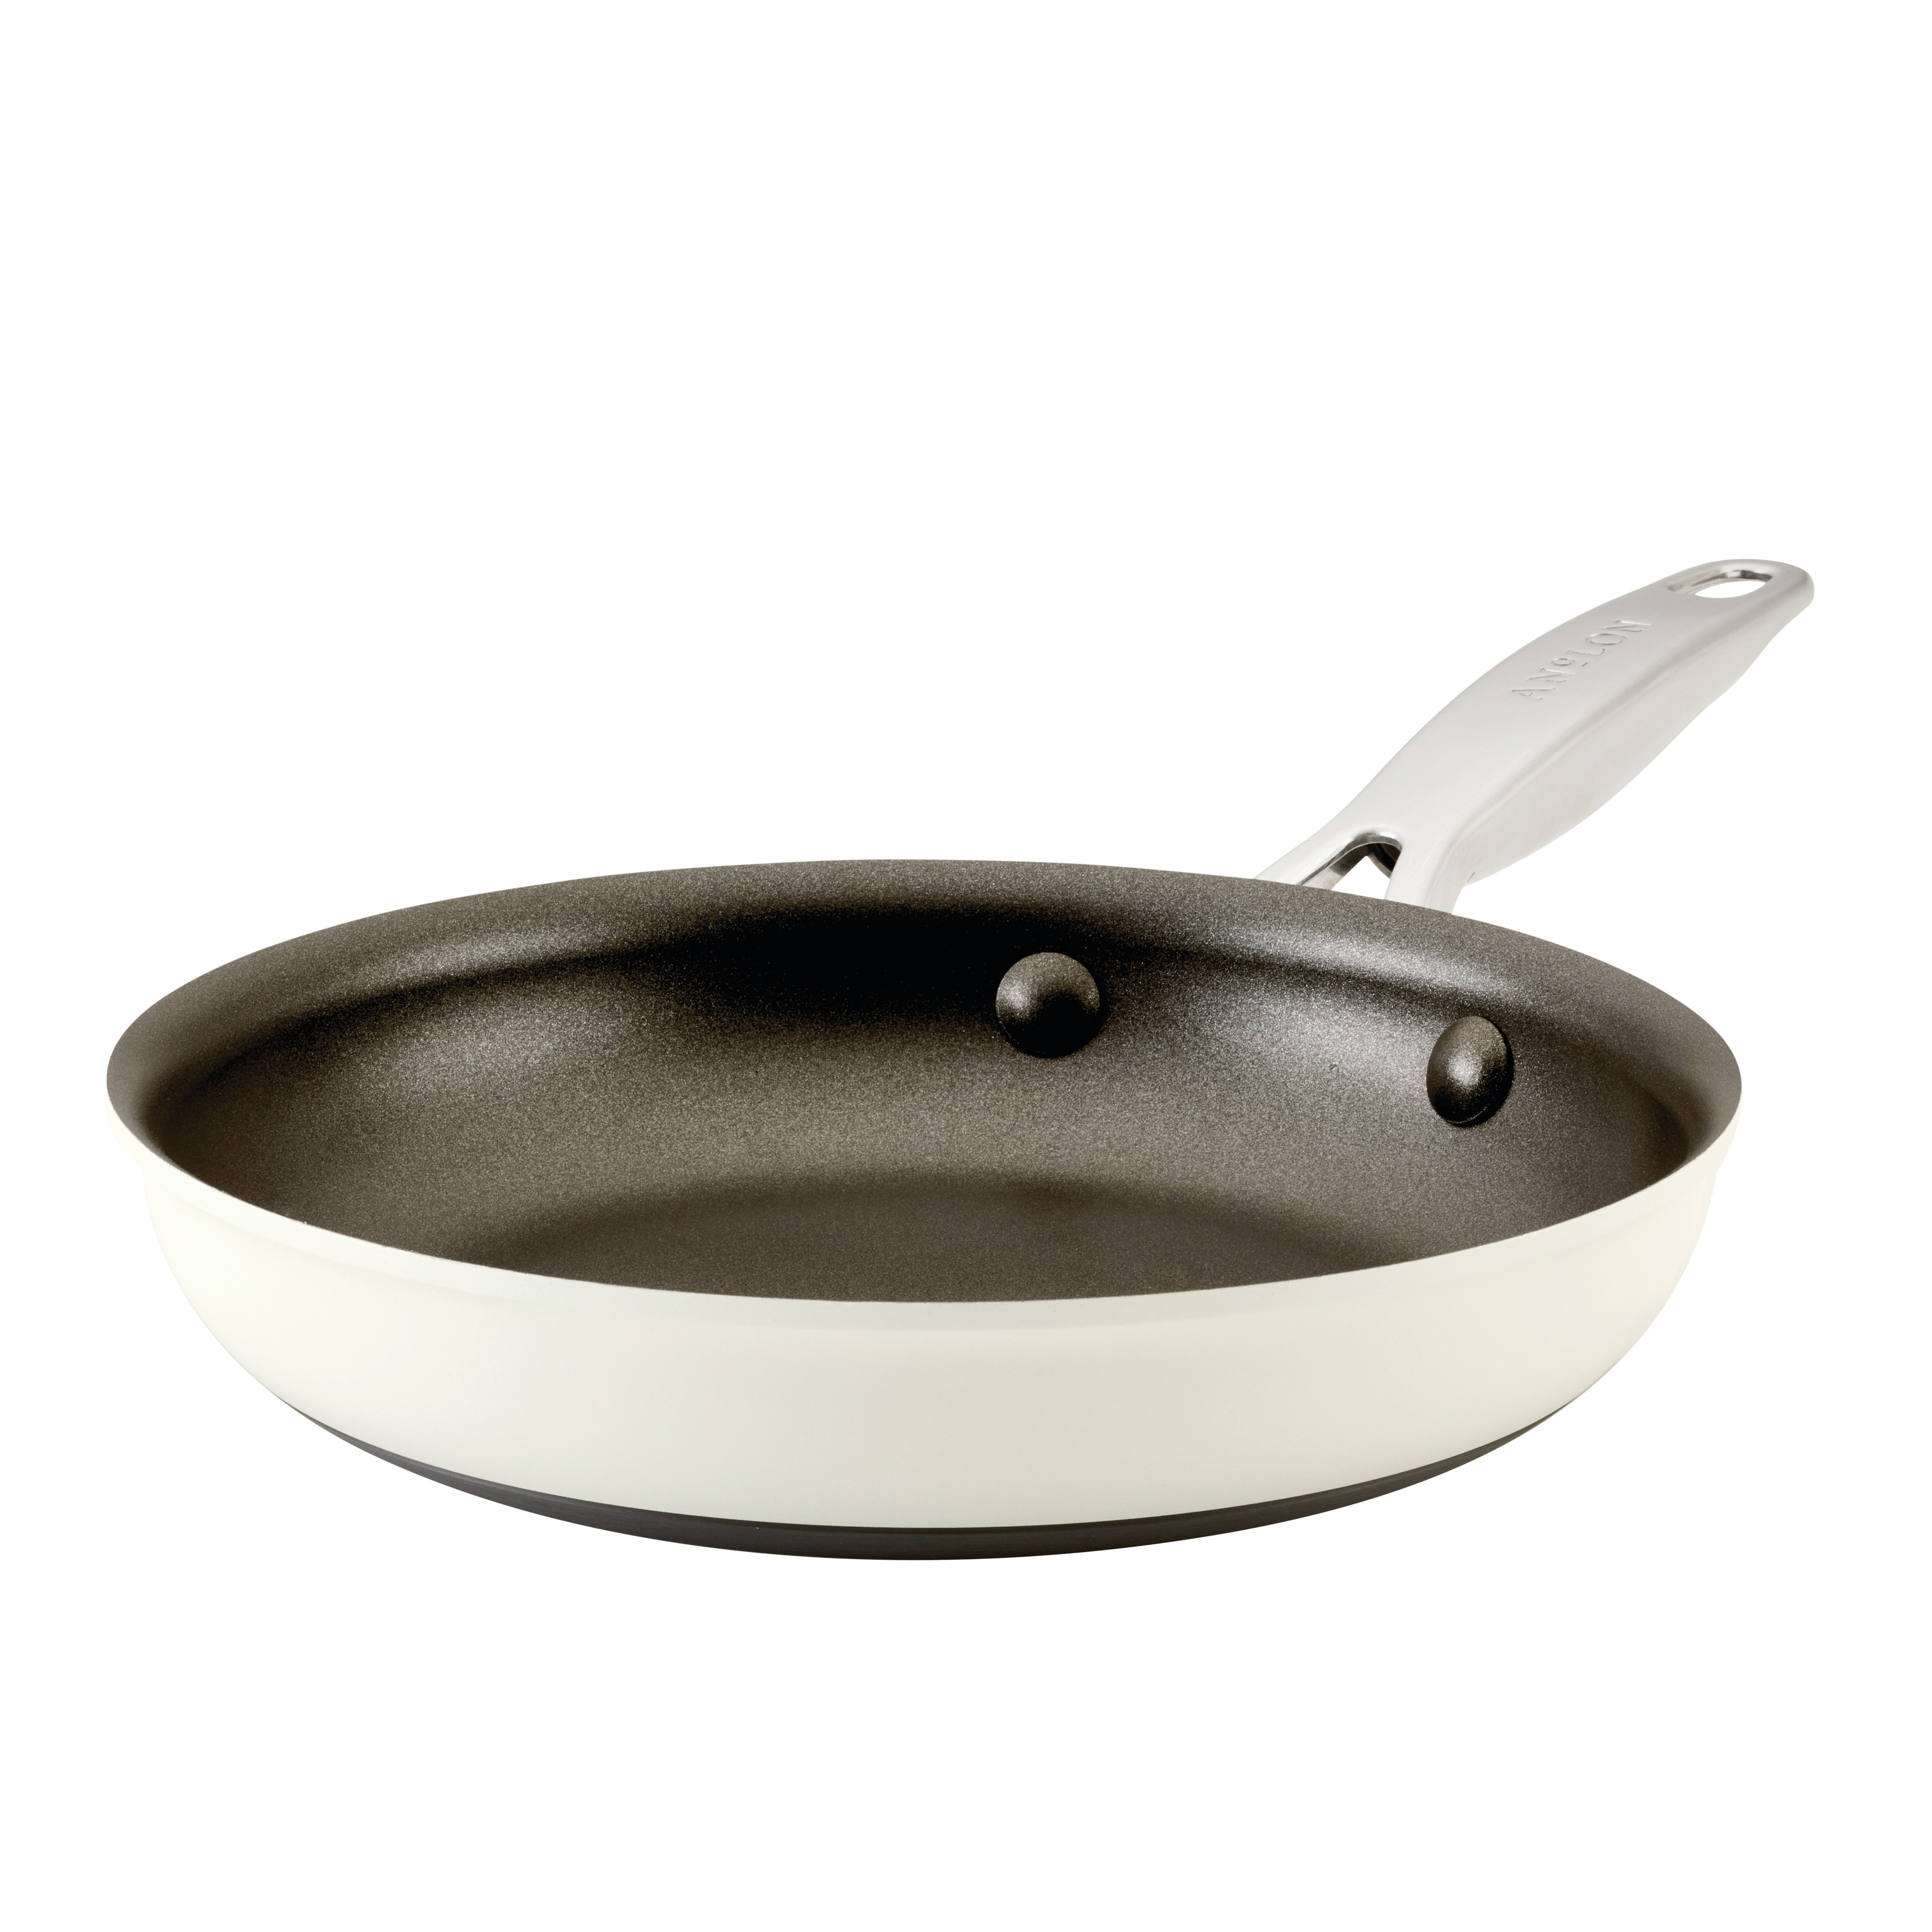 https://ak1.ostkcdn.com/images/products/is/images/direct/5c5003b5e24824fdac06adb2156c9007a00aacb1/Anolon-Achieve-Hard-Anodized-Nonstick-Frying-Pan%2C-12-Inch.jpg